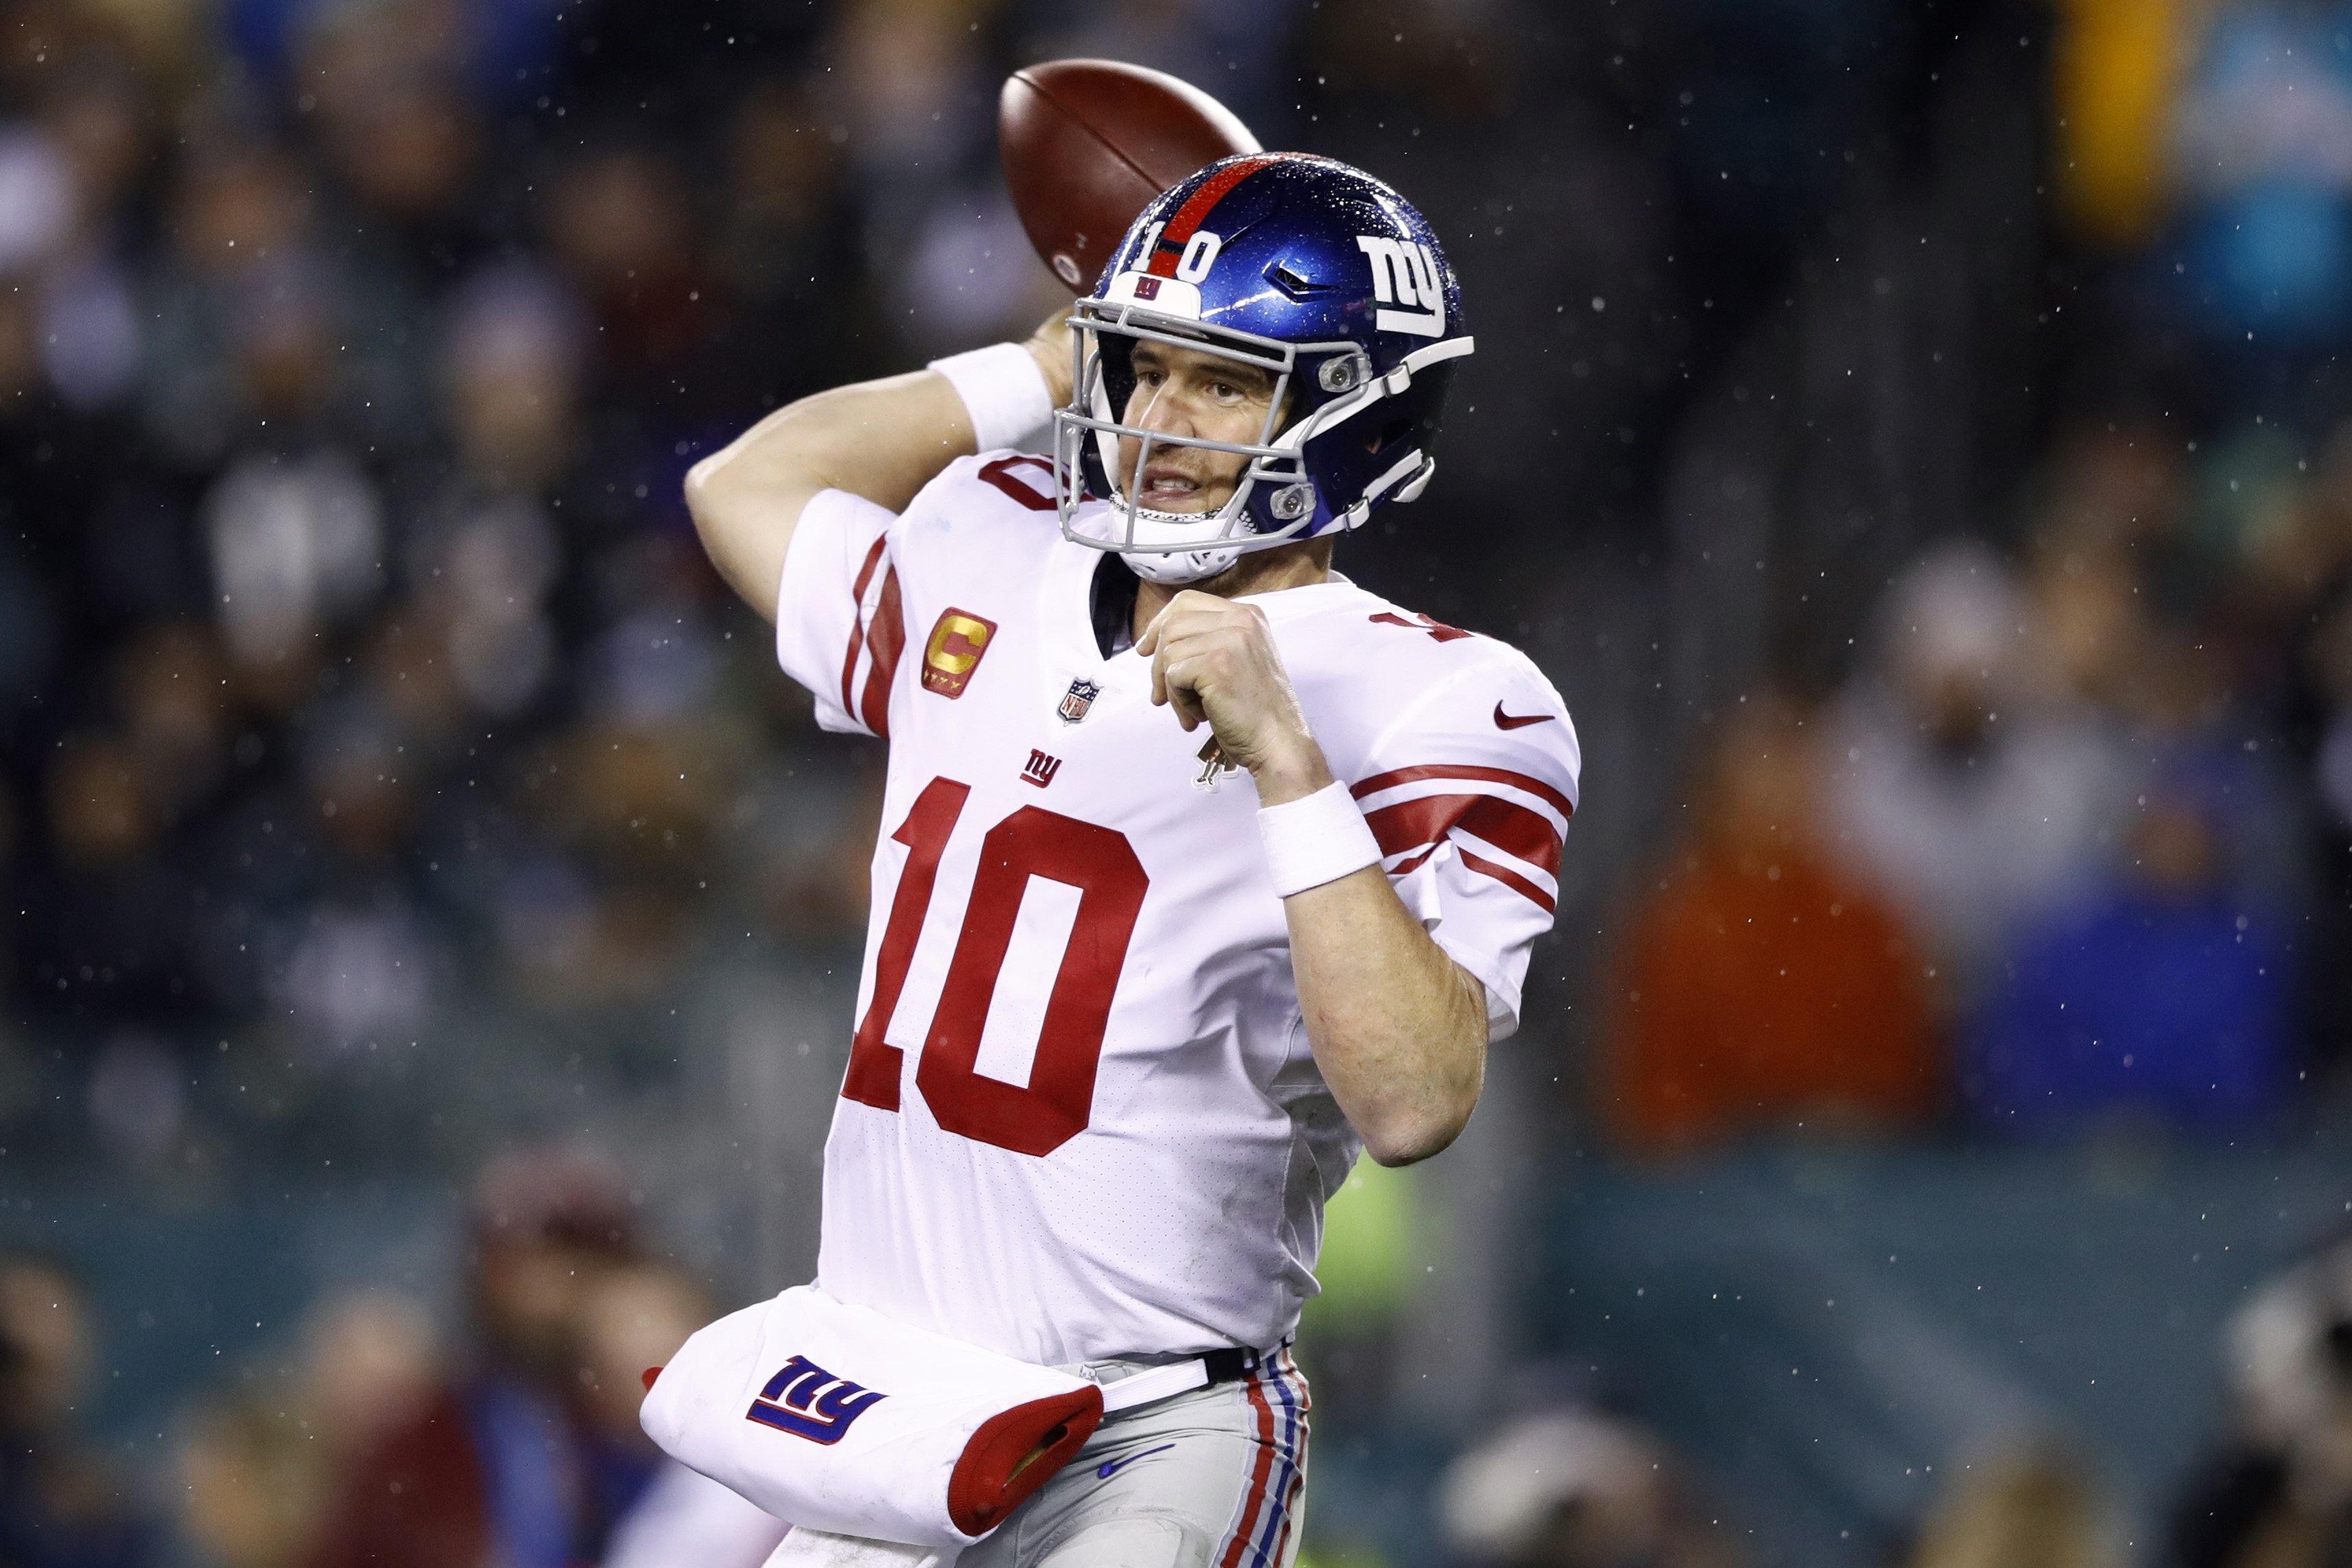 Eli Manning says Eagles could win the Super Bowl, gives tips to